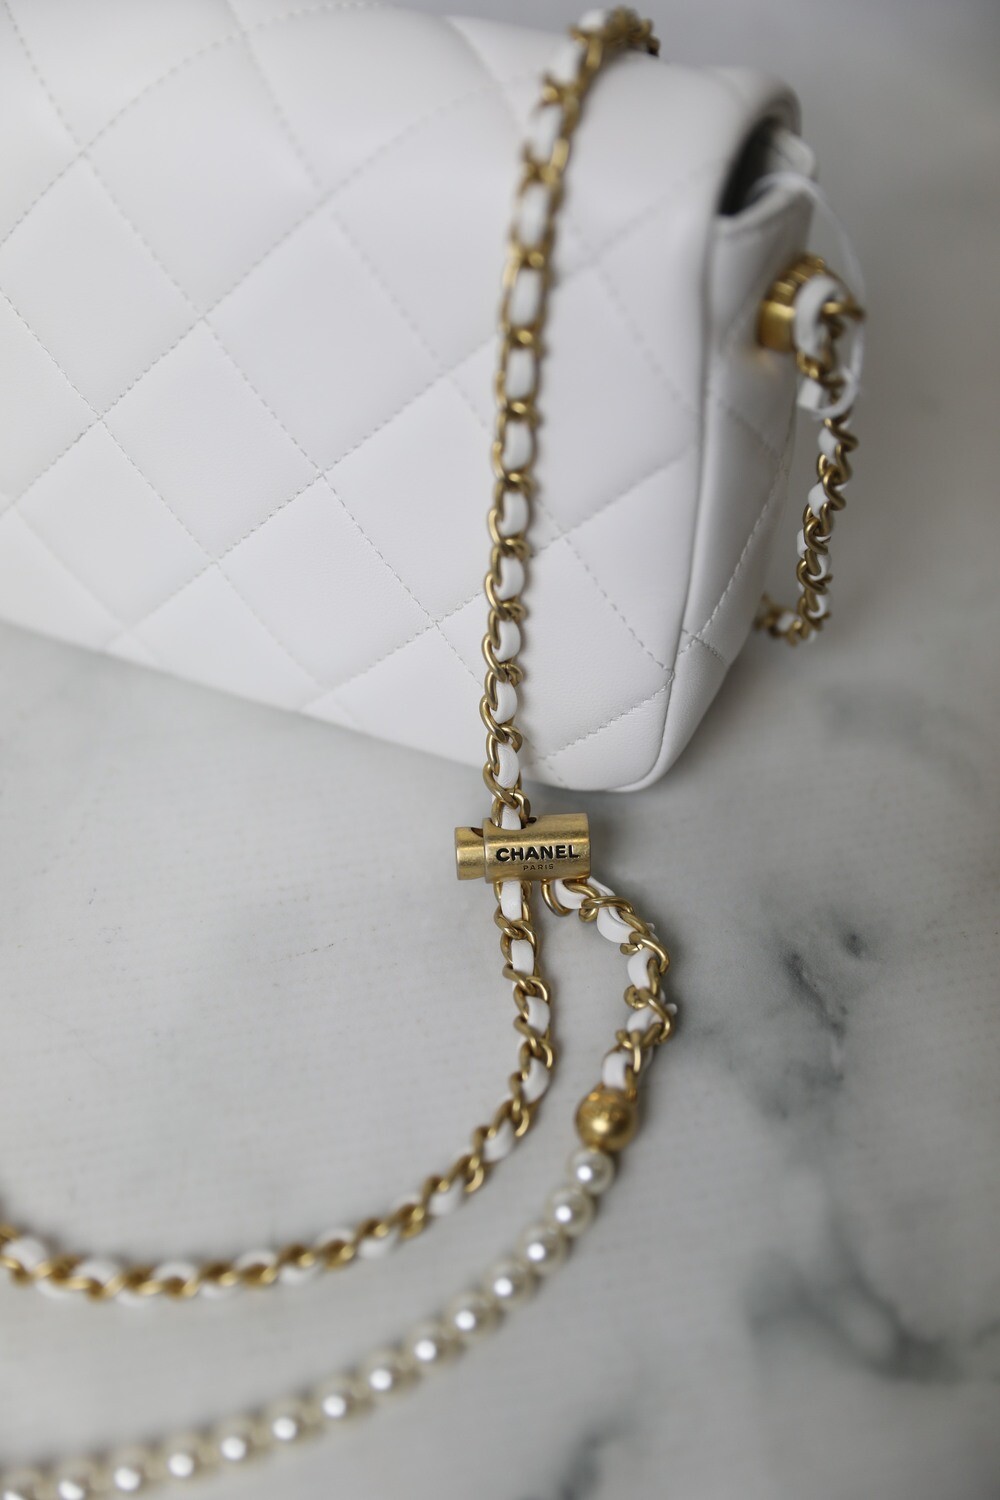 Chanel Seasonal Flap Bag, My Perfect Mini, White Lambskin Leather, Gold  Hardware, Pearl and Leather Strap